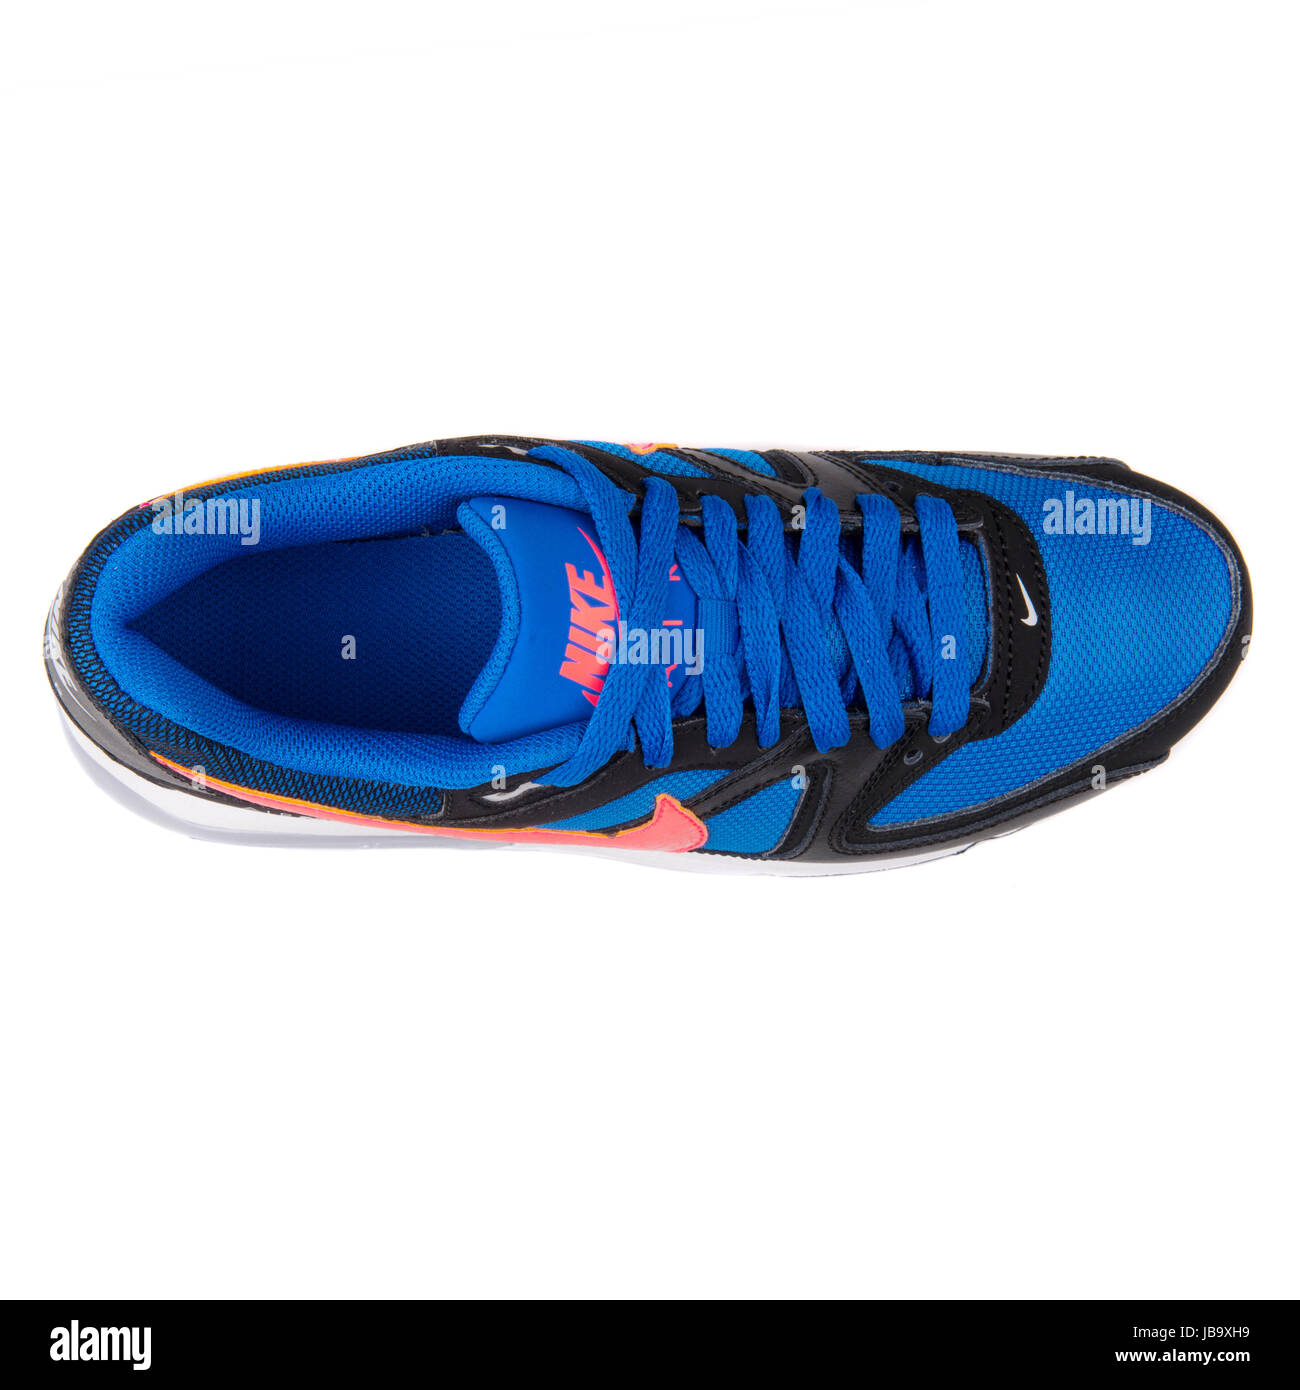 Nike Air Max Command (GS) Blue, Black and Red Youth's Running Shoes -  407759-480 Stock Photo - Alamy